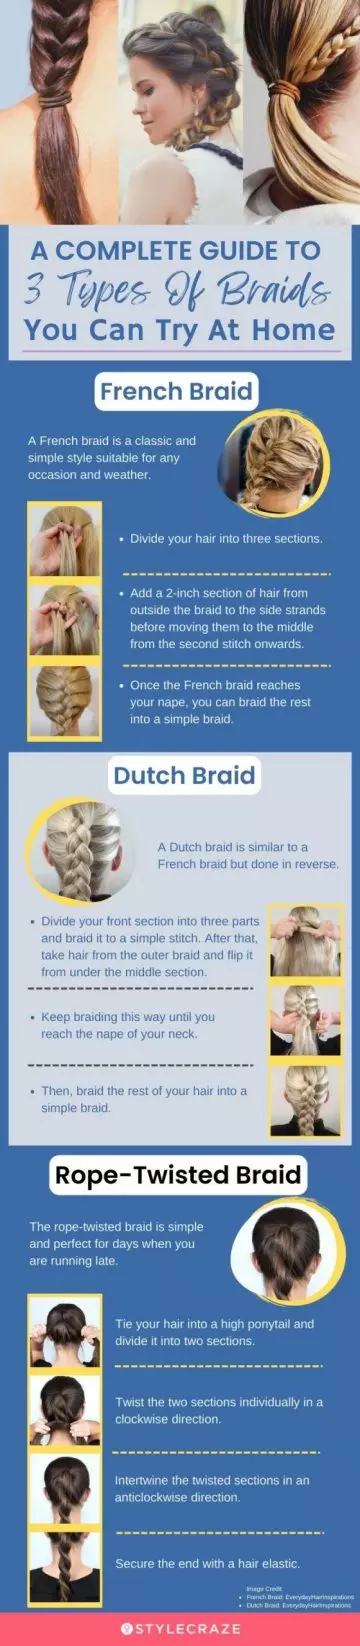 a complete guide to 3 types of braids you can try at home (infographic)